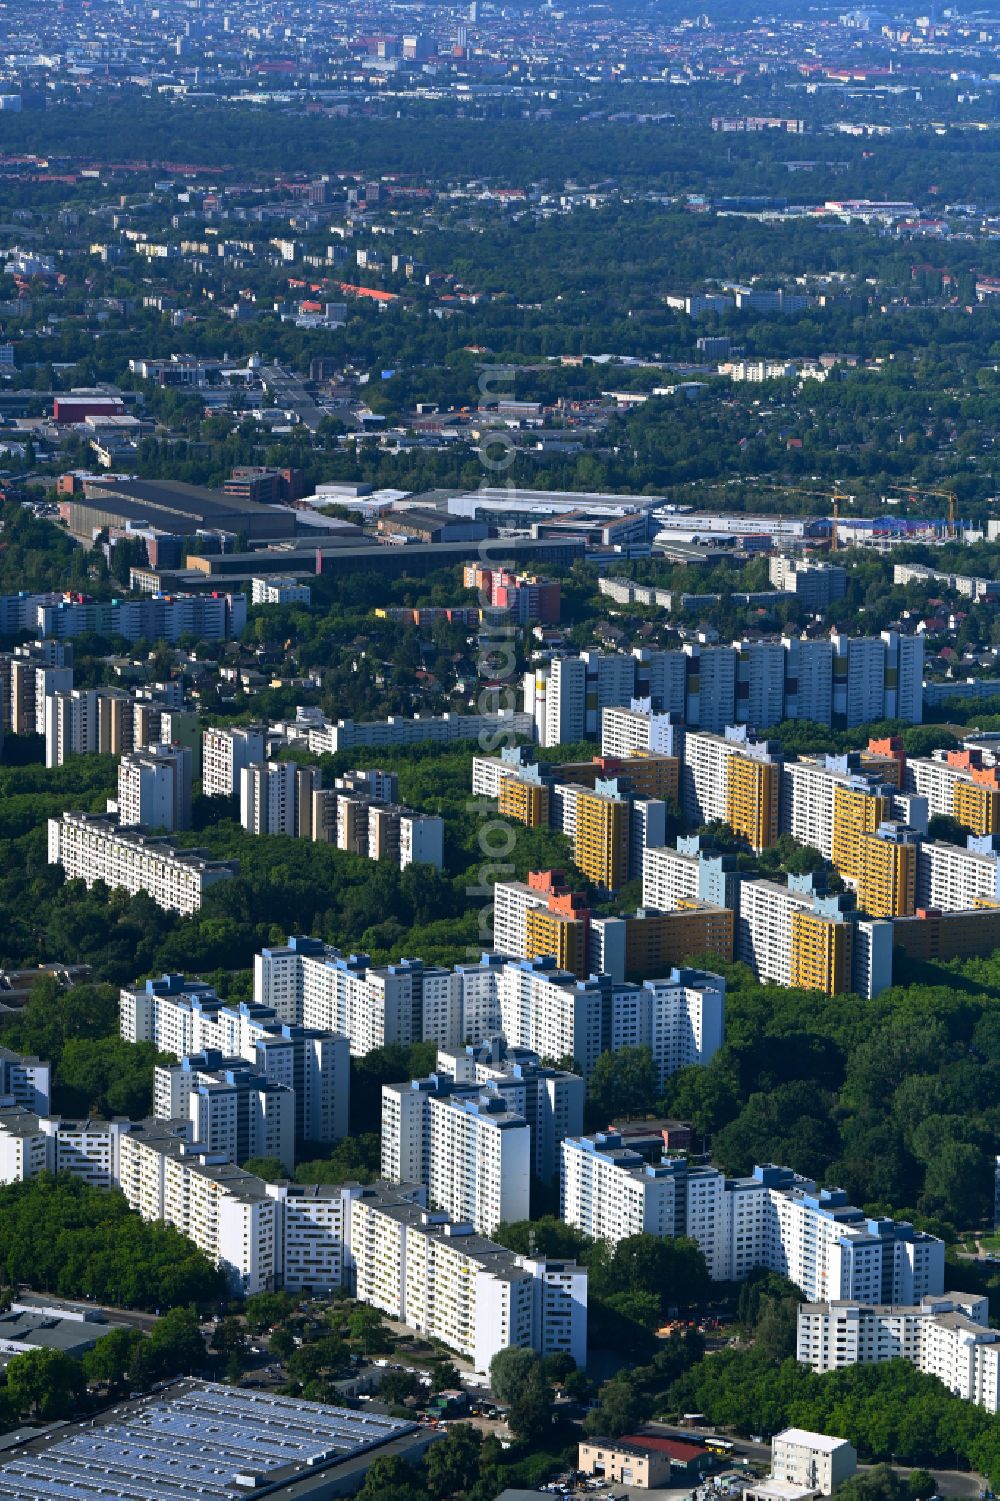 Berlin from the bird's eye view: Skyscrapers in the residential area of industrially manufactured settlement on street Senftenberger Ring in the district Maerkisches Viertel in Berlin, Germany